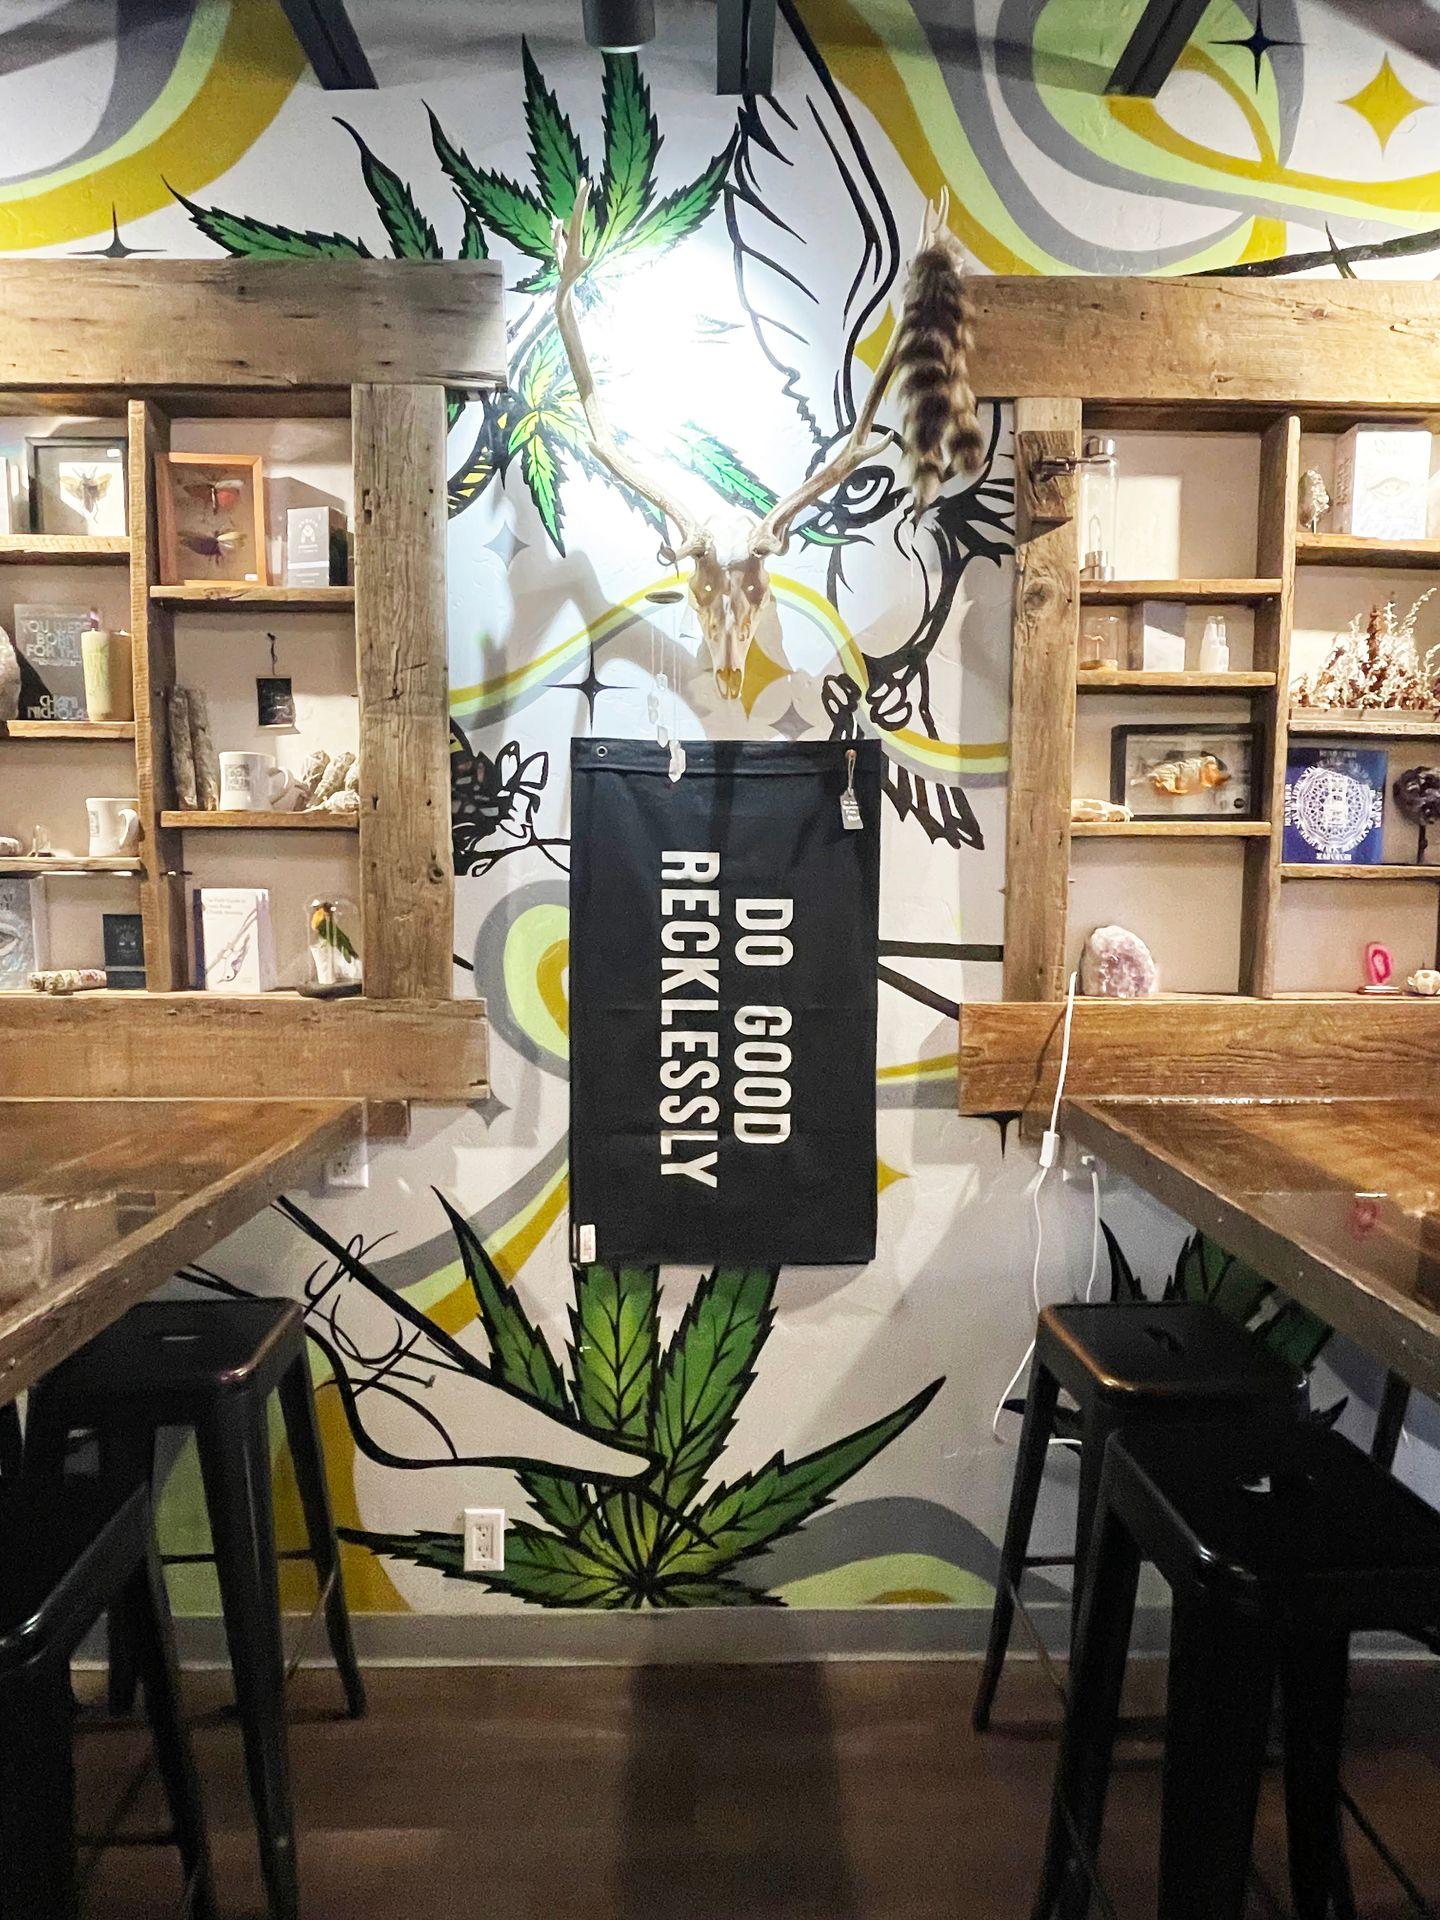 Tables inside of House of Vibes. A sign reads "Do Recklessly Good" in the center and shelves with unique items sit behind the tables.